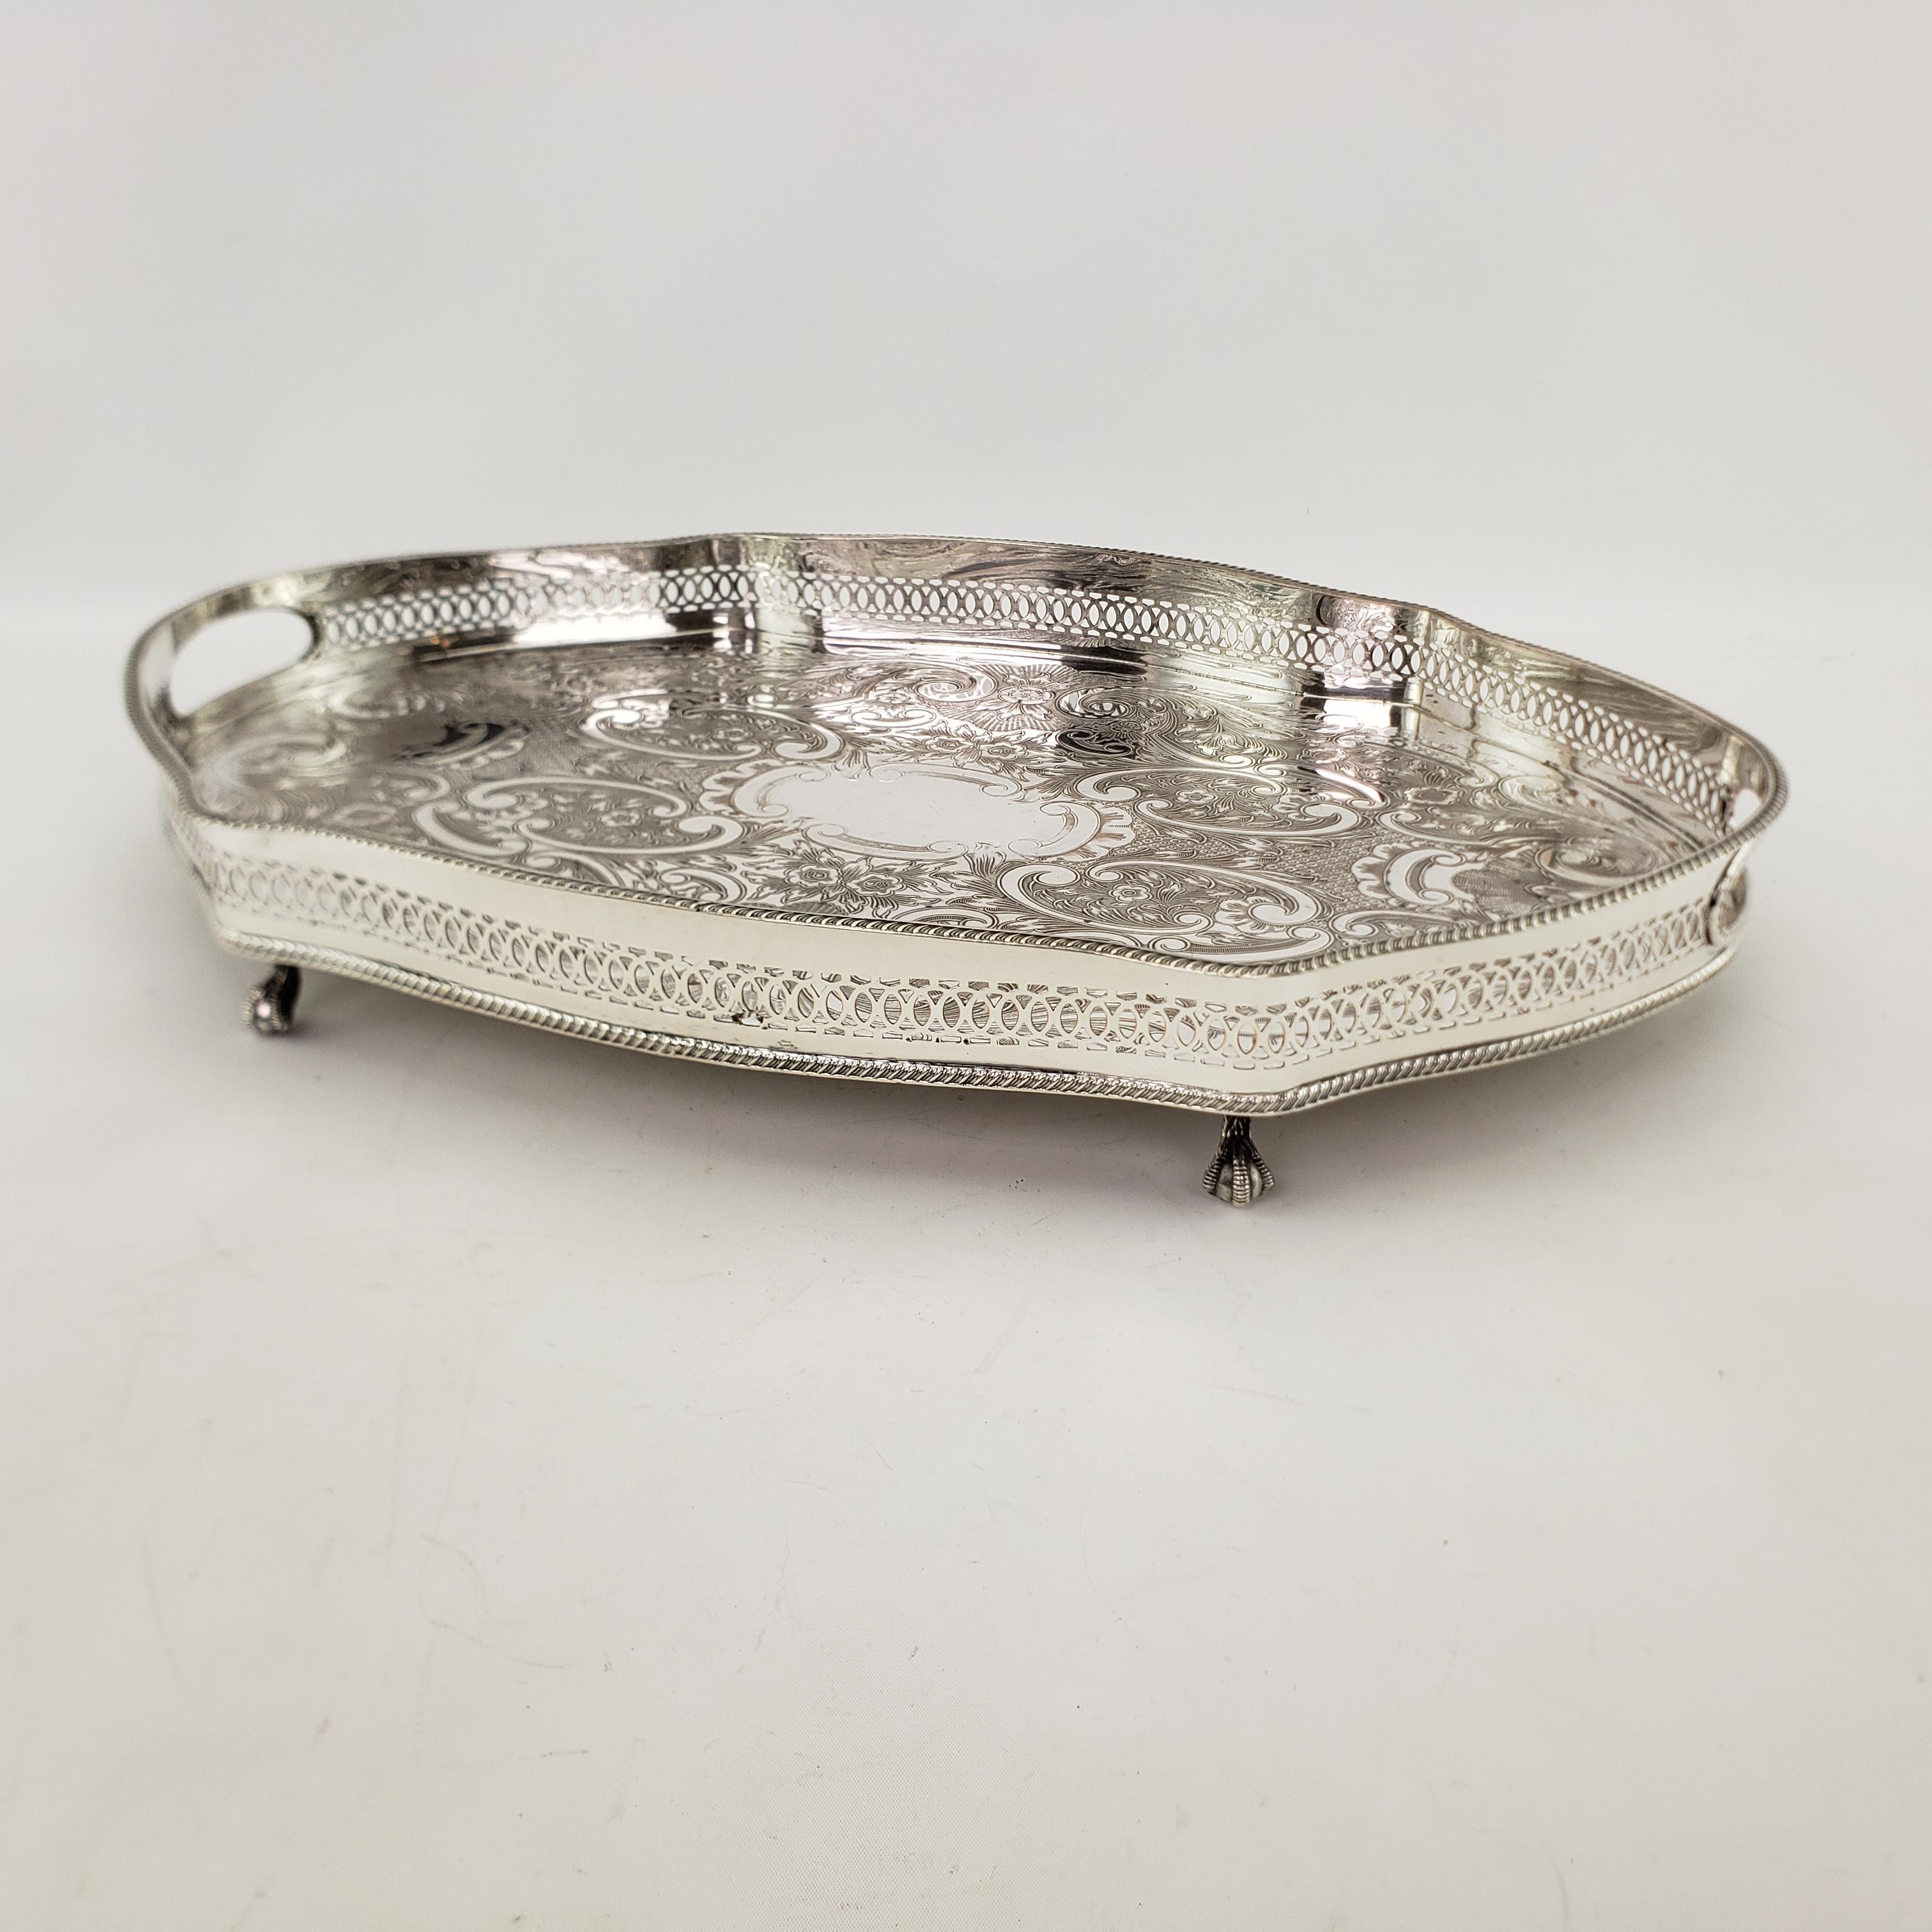 Machine-Made Antique Silver Plated Footed Gallery Serving Tray with Ornate Floral Engraving